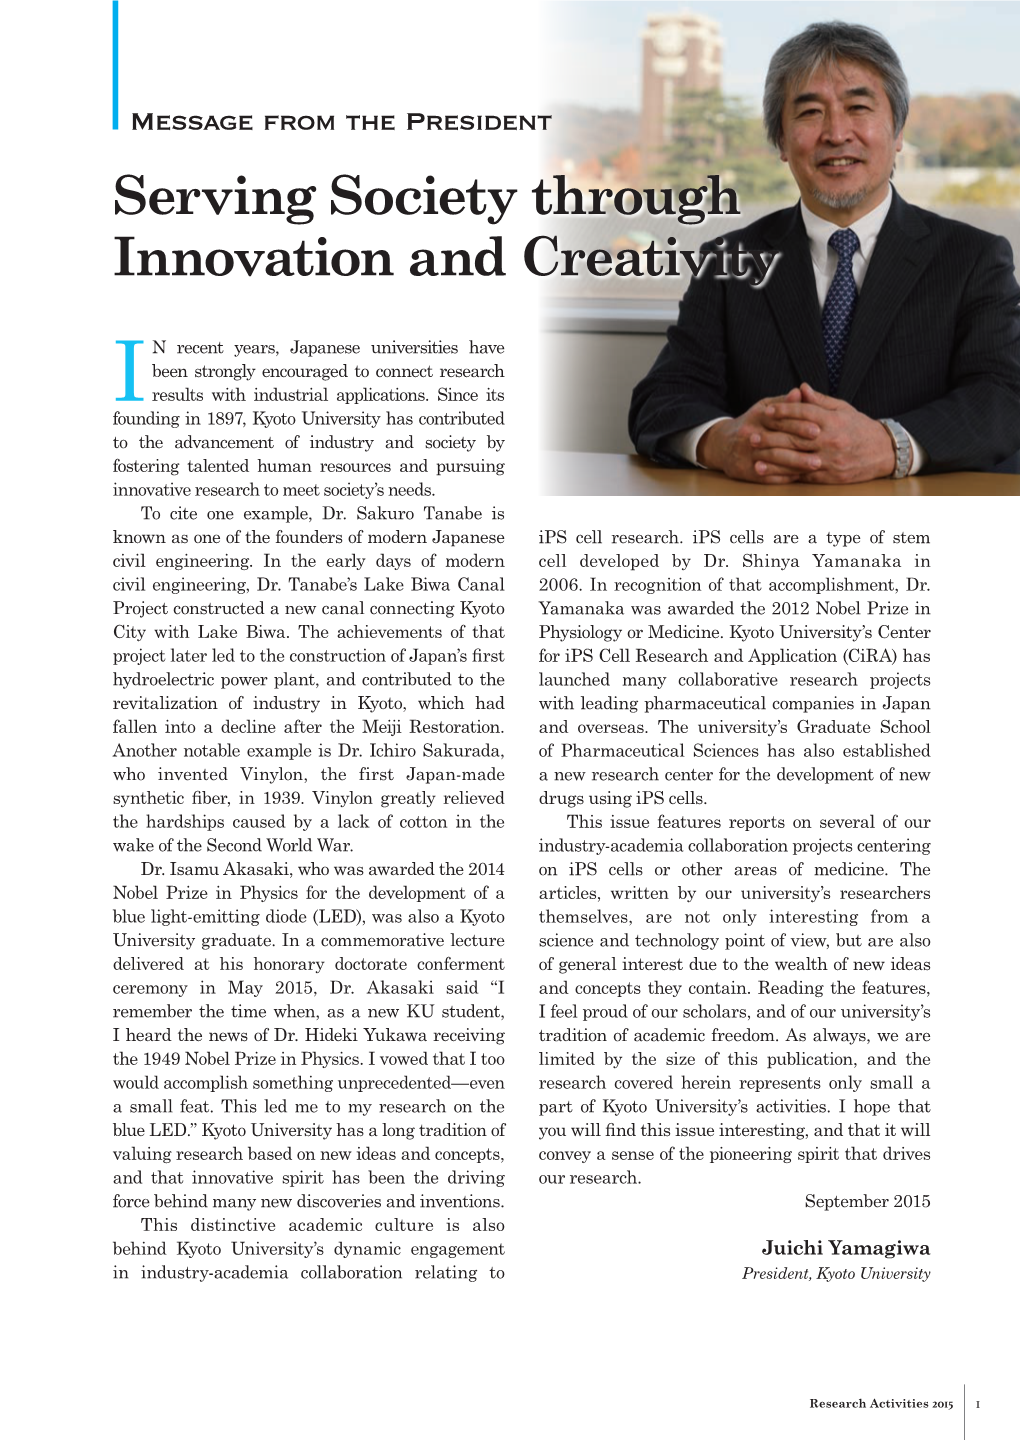 Serving Society Through Innovation and Creativity